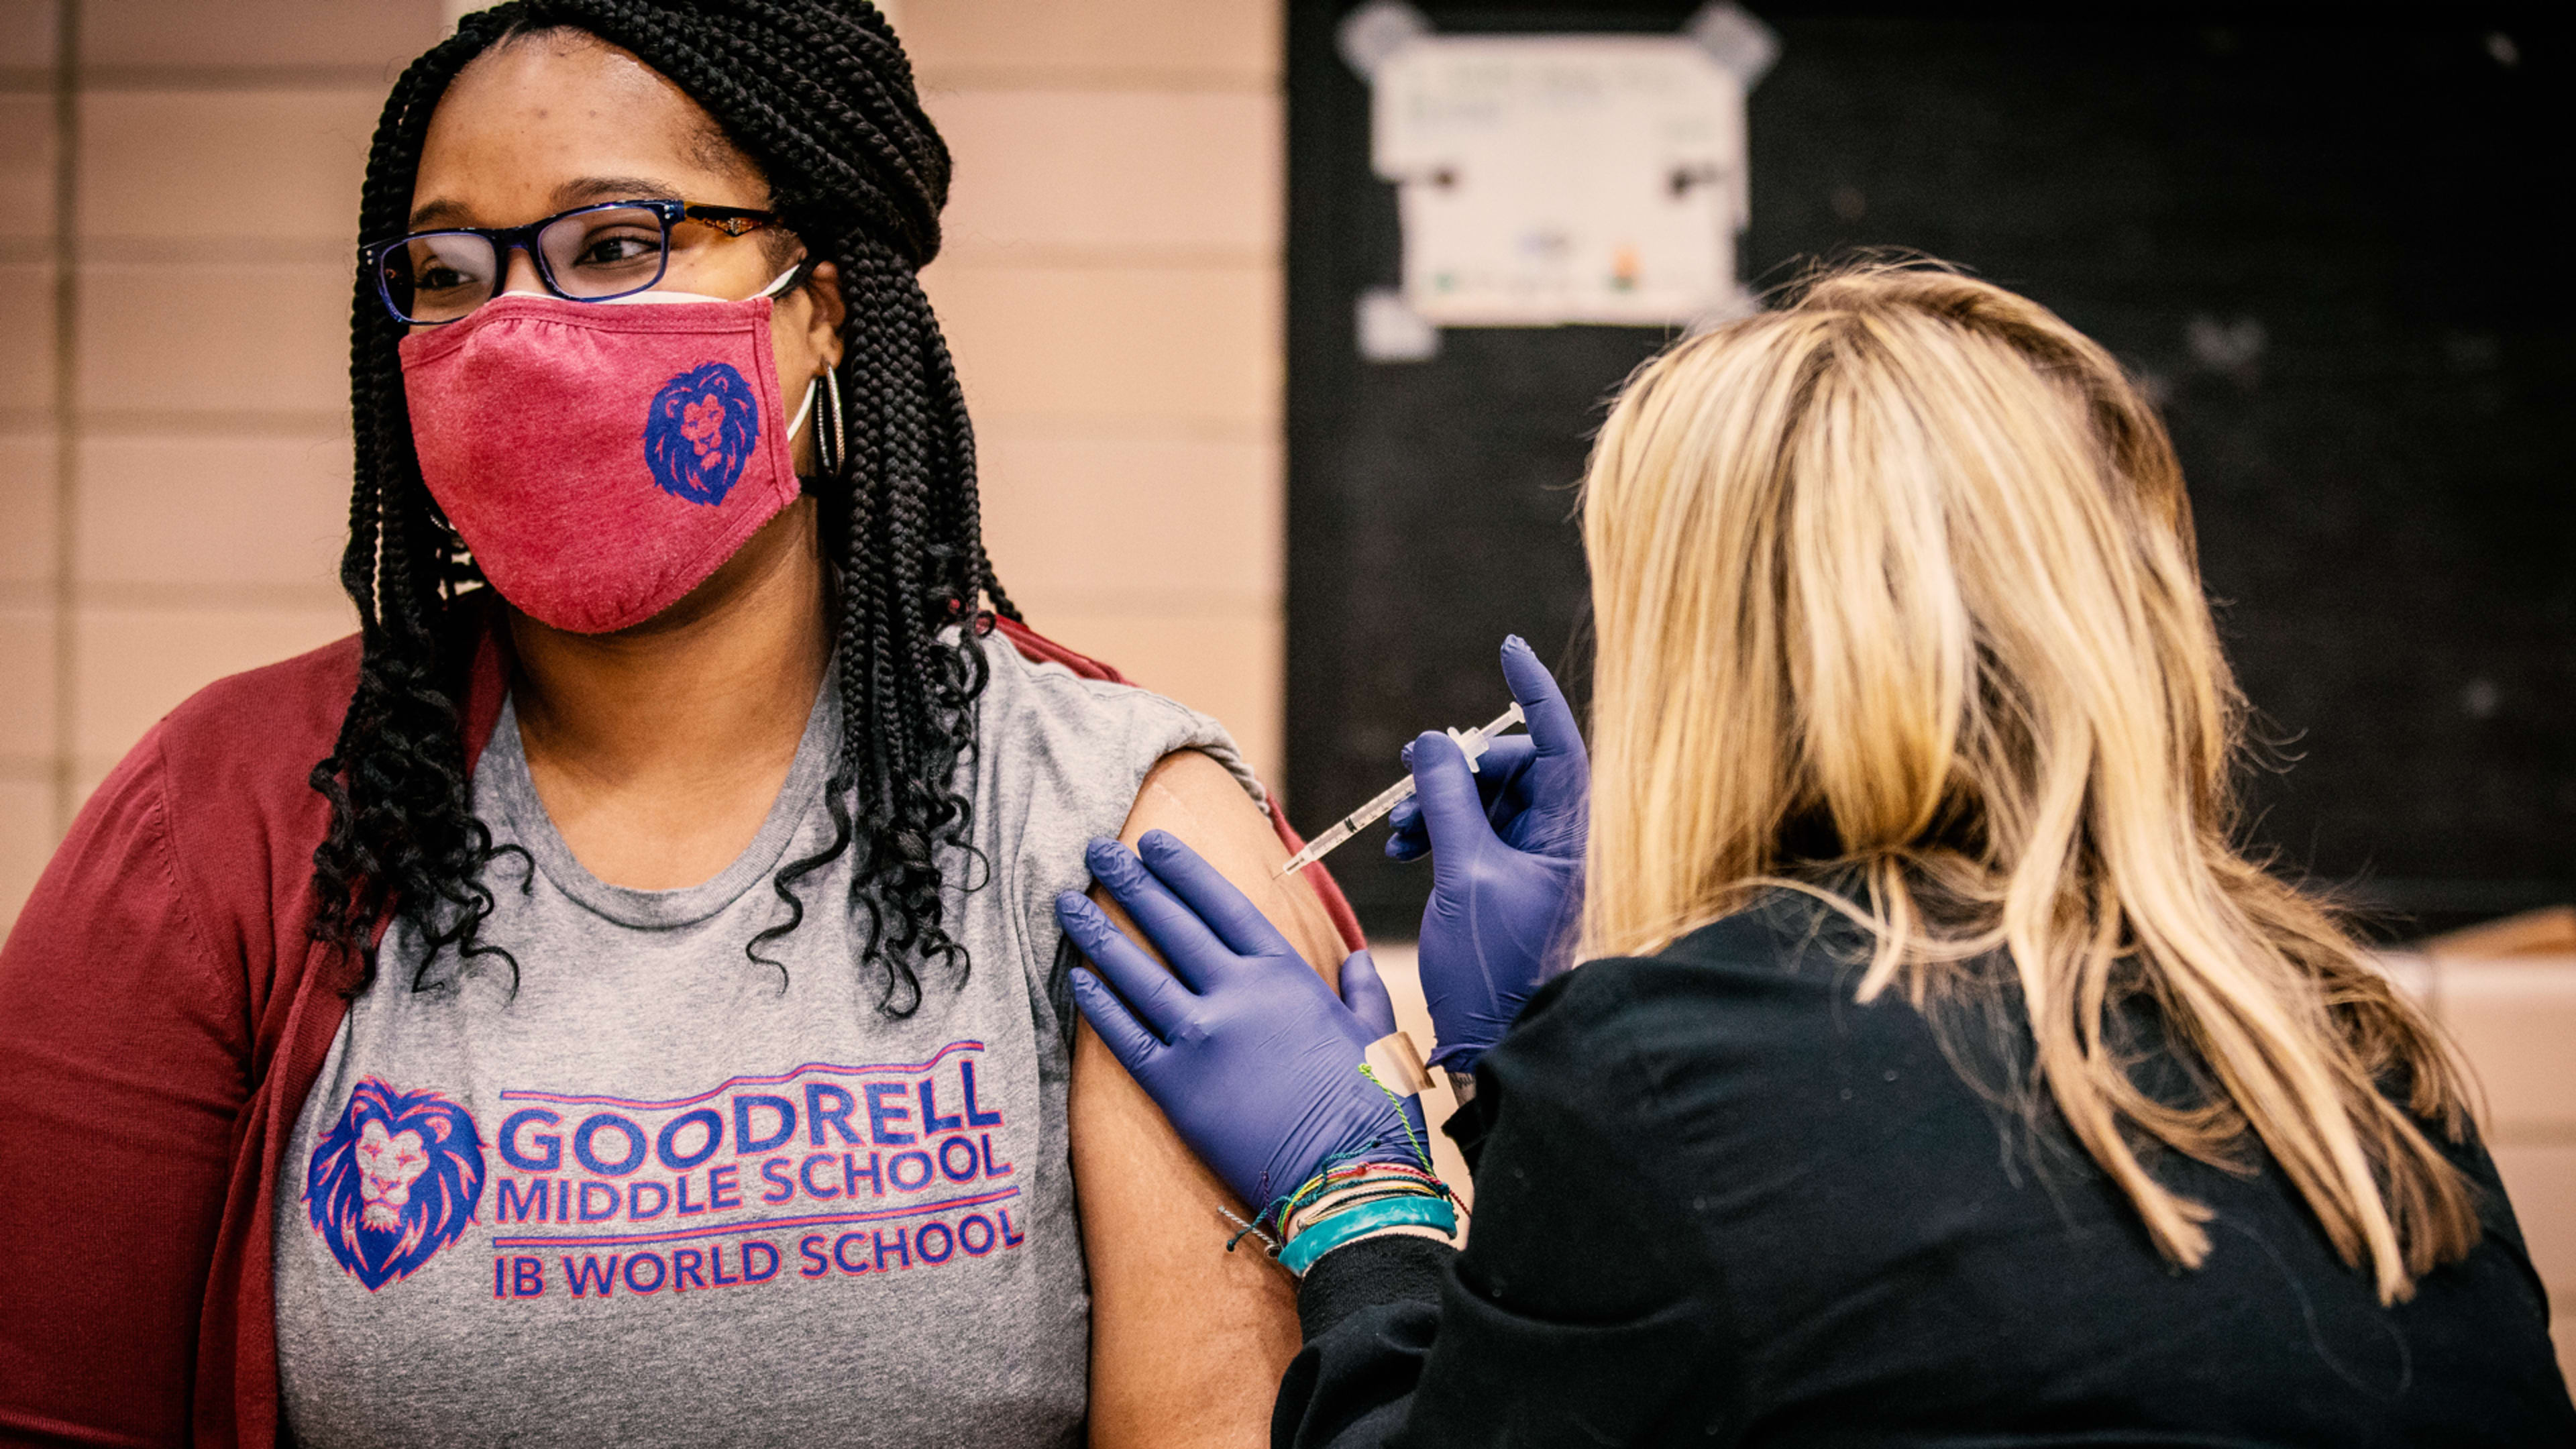 How to get a COVID-19 vaccine by volunteering